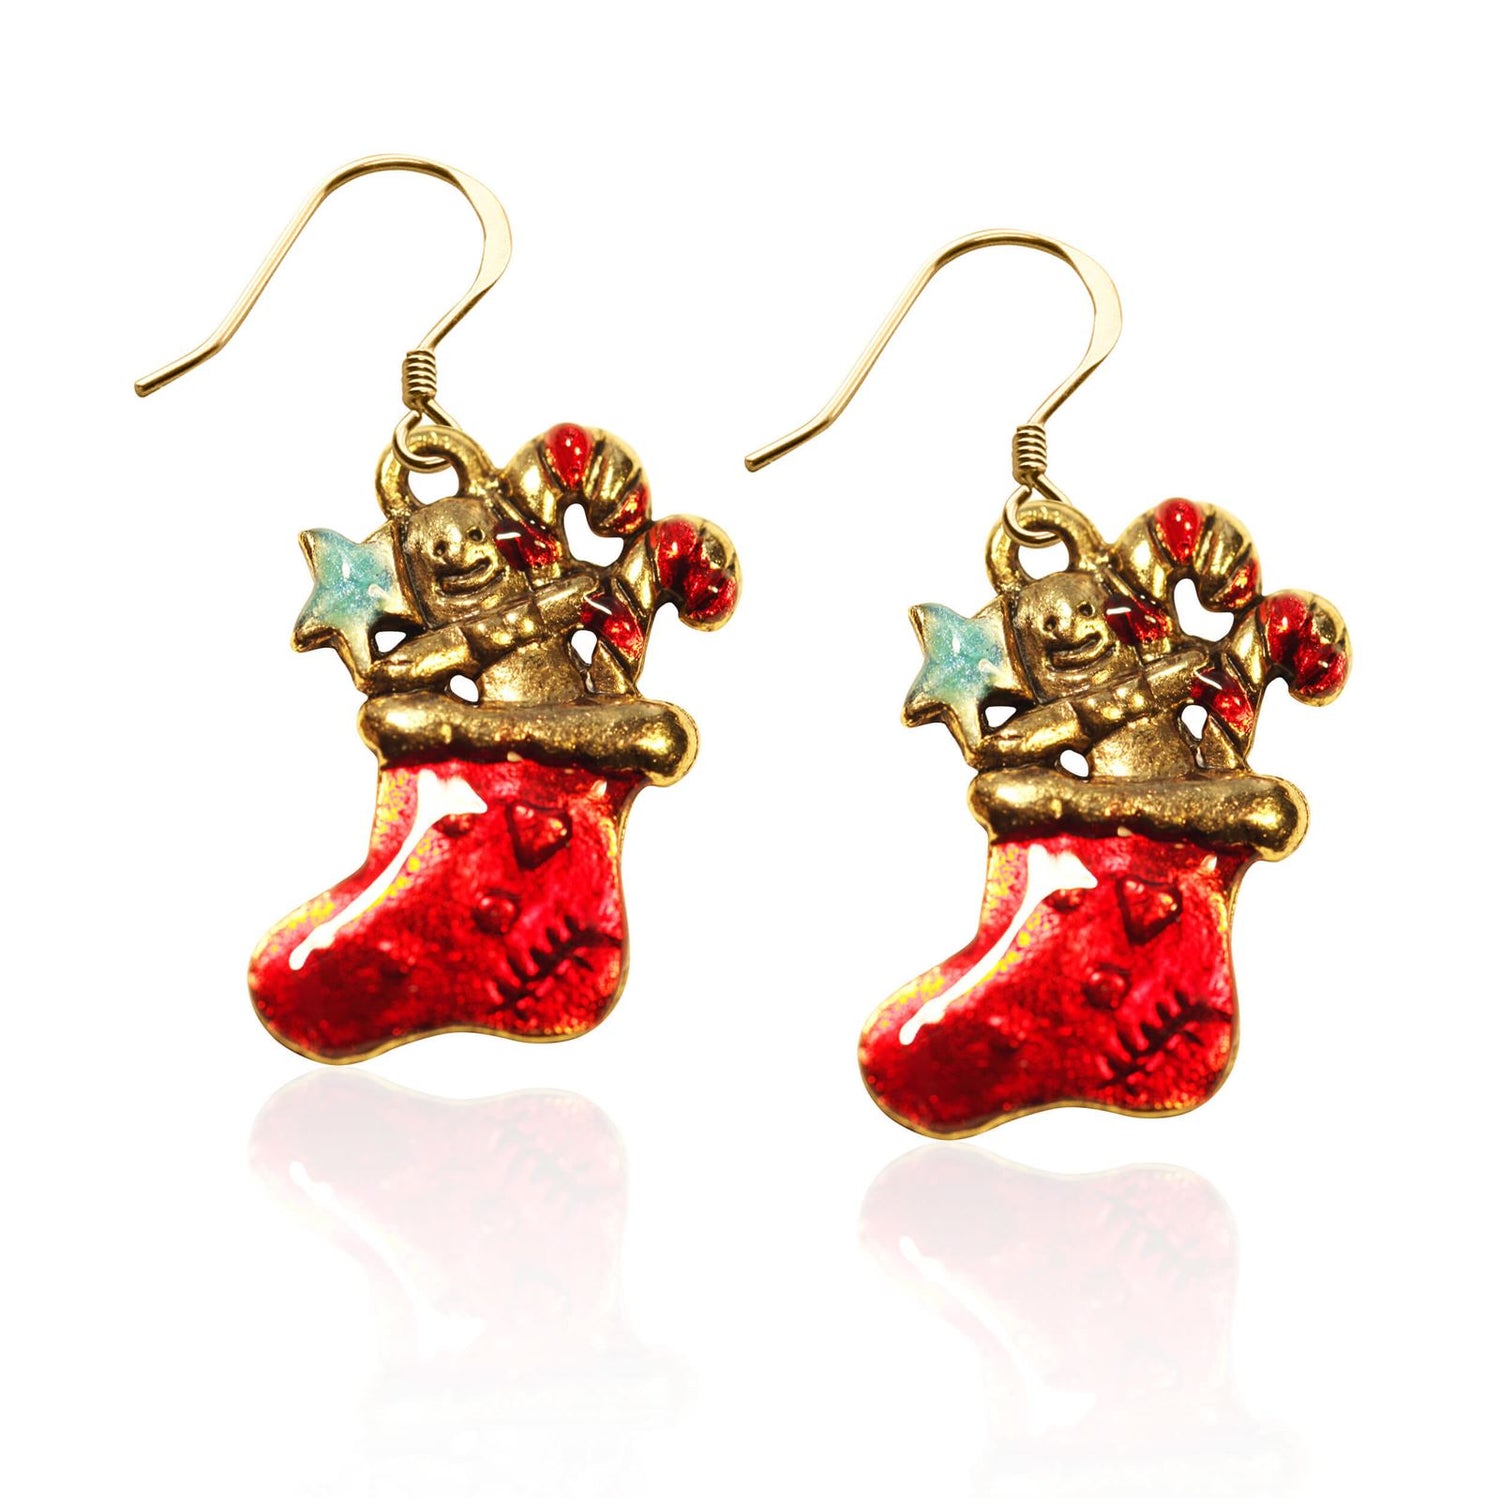 Whimsical Gifts | Christmas Stocking Charm Earrings in Gold Finish | Holiday & Seasonal Themed | Christmas | Jewelry